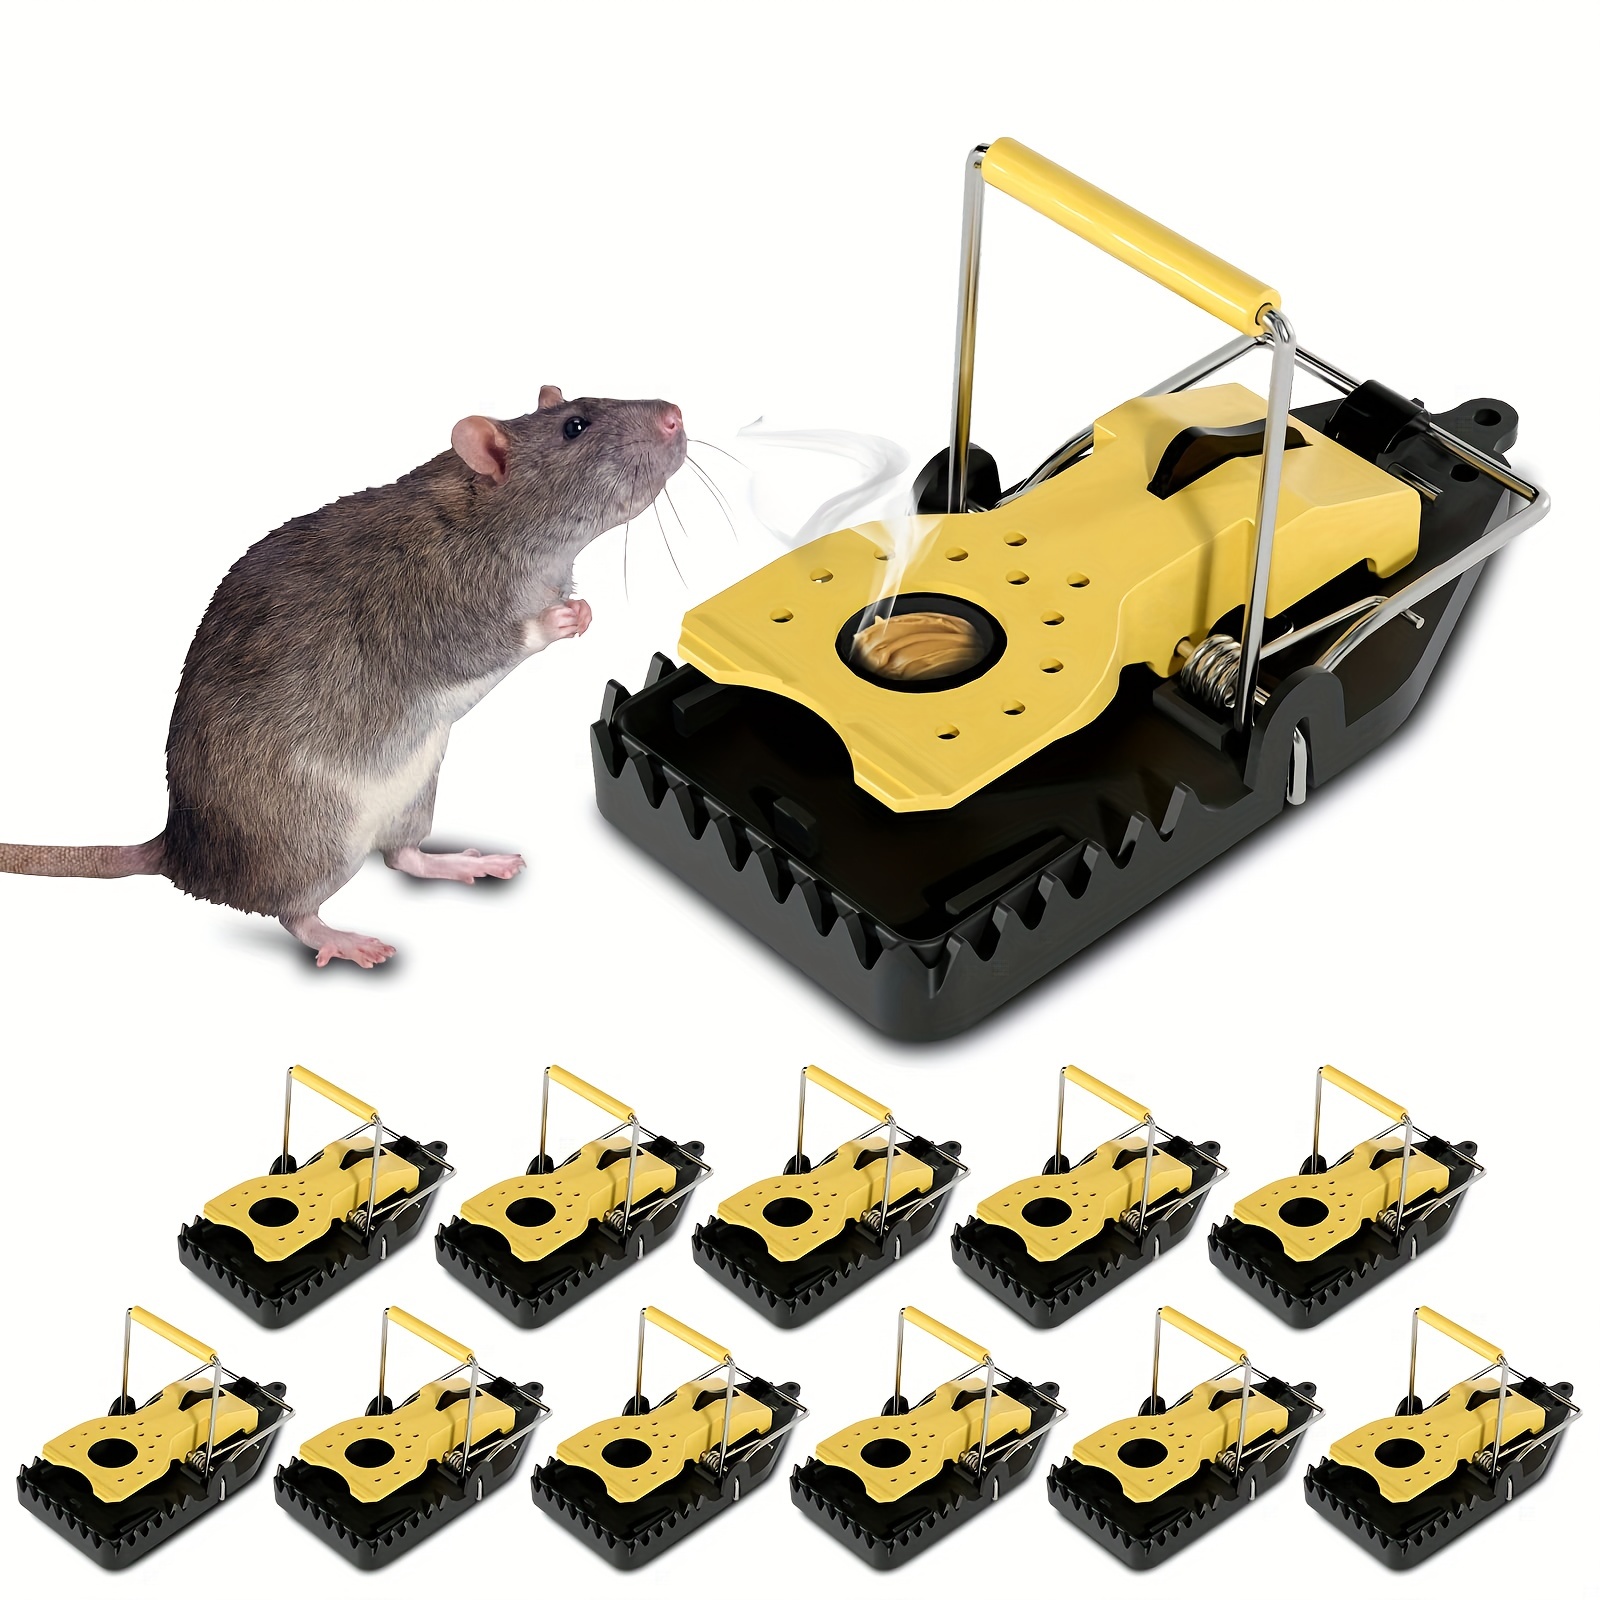 Indoor Automation Iron Mouse Traps Work Home Humane Catch Large